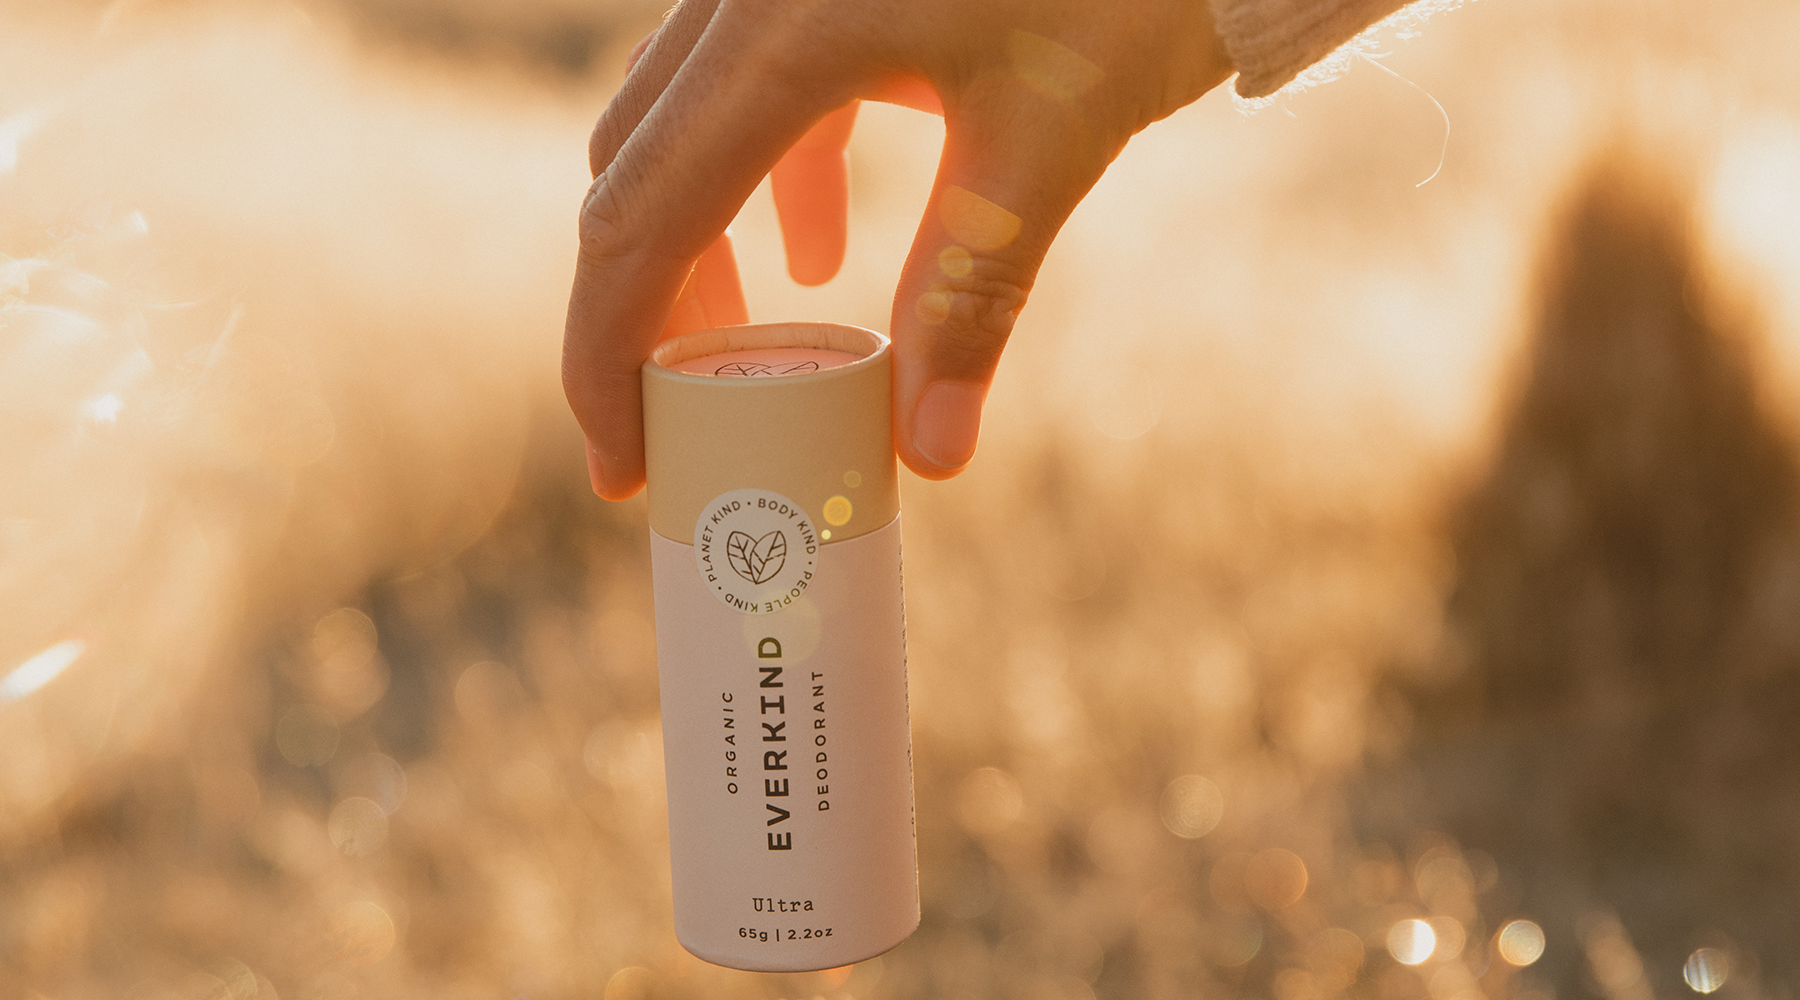 Everkind Ultra - a mama-to-be essential. Natural deodorant for people who don't want to choose between wellbeing and what works.